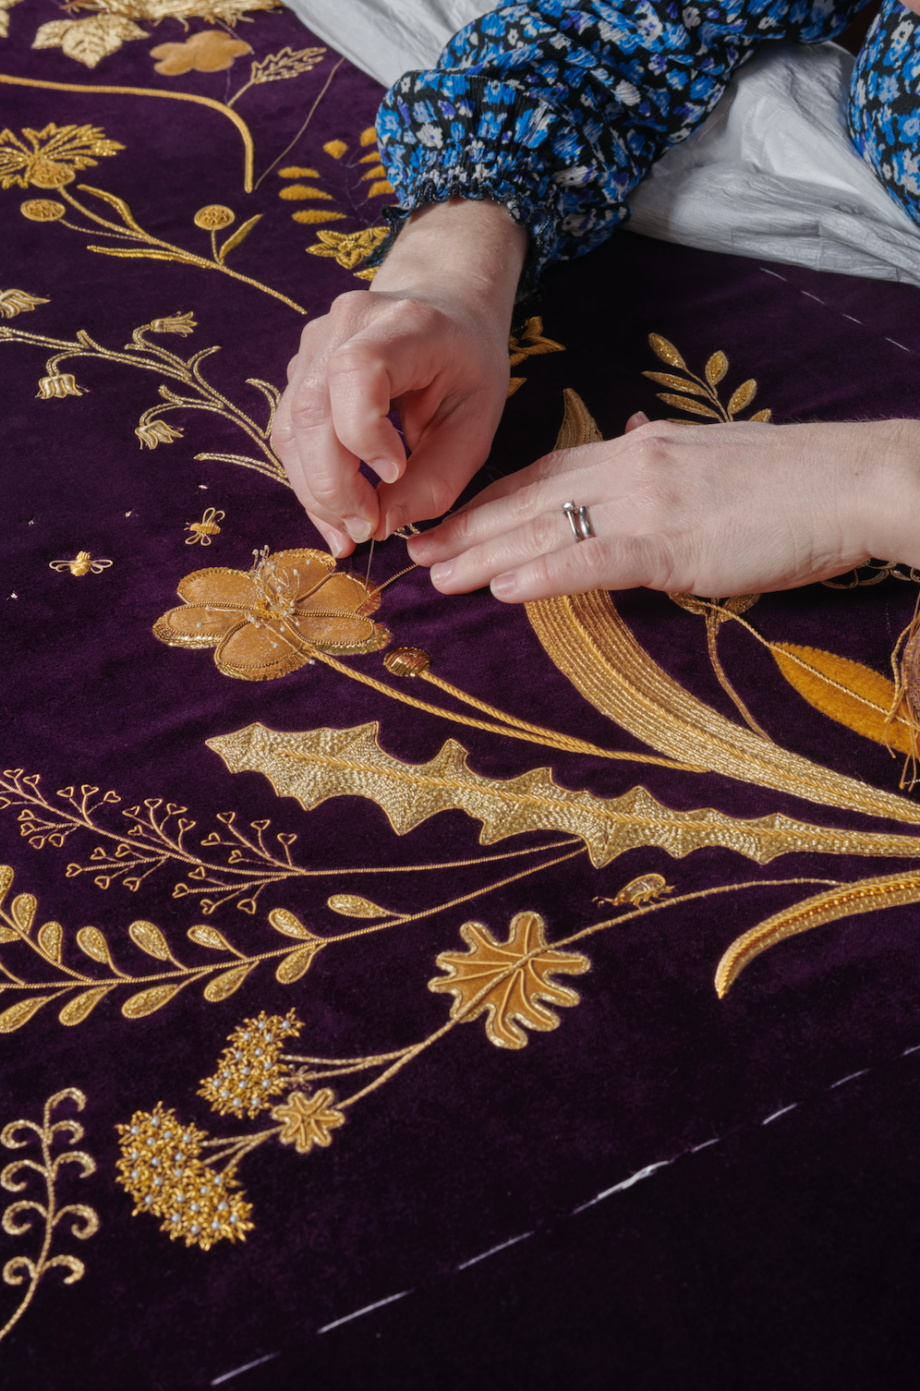 The Royal School of Needlework work on The Queen Consort's Robe of Estate